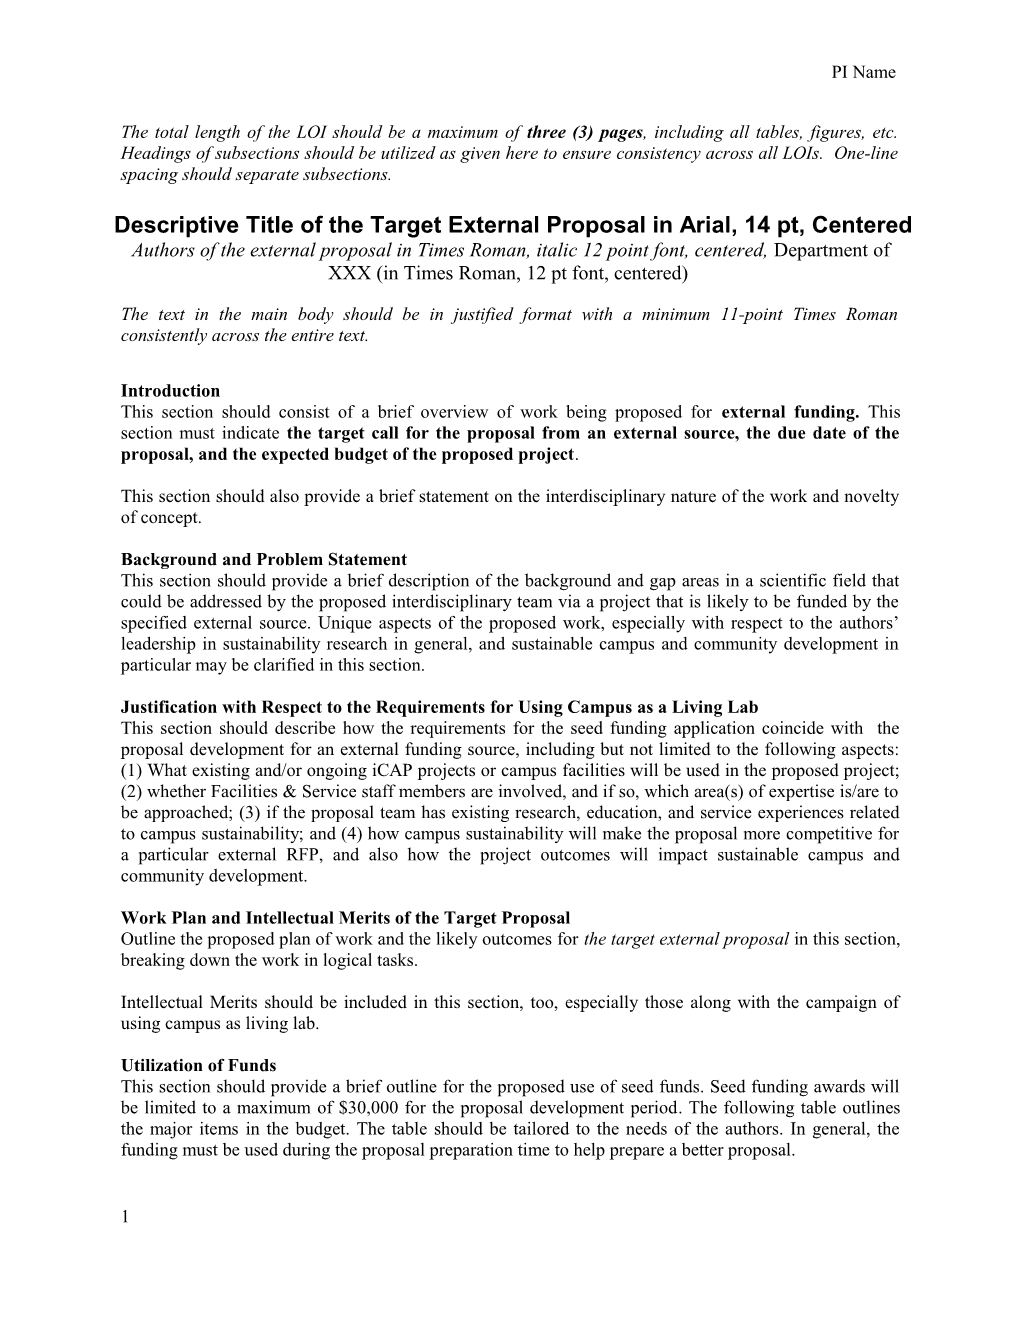 Descriptive Title of the Target External Proposal in Arial, 14 Pt, Centered